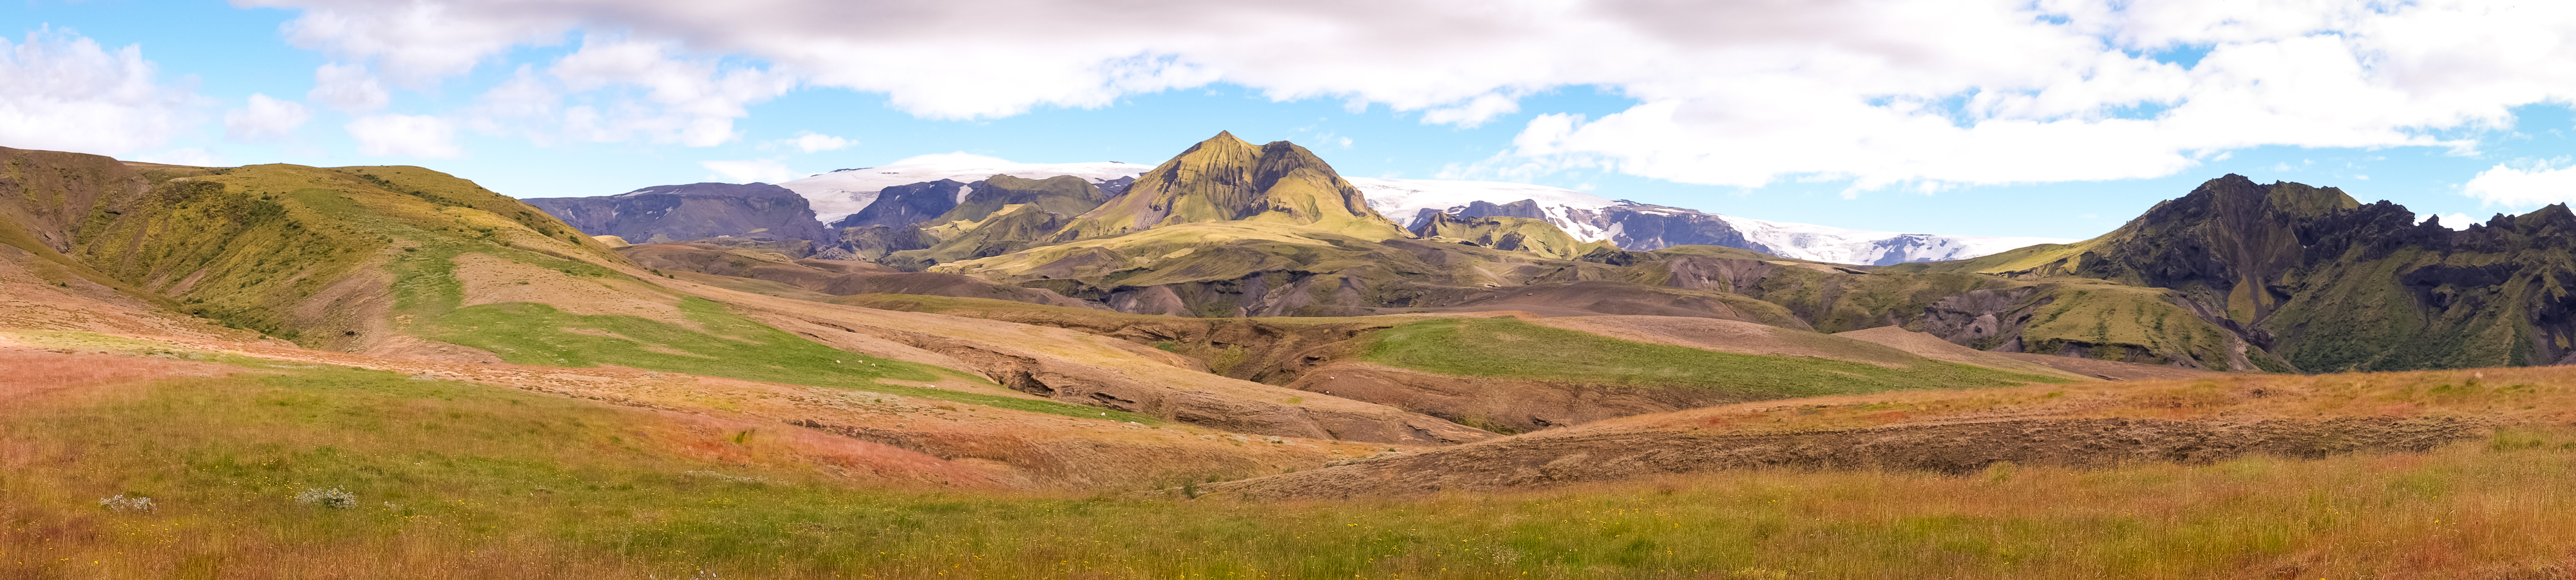 Panorama of part of Day 4 of the Laugavegur Trail - Icelandic Highlands